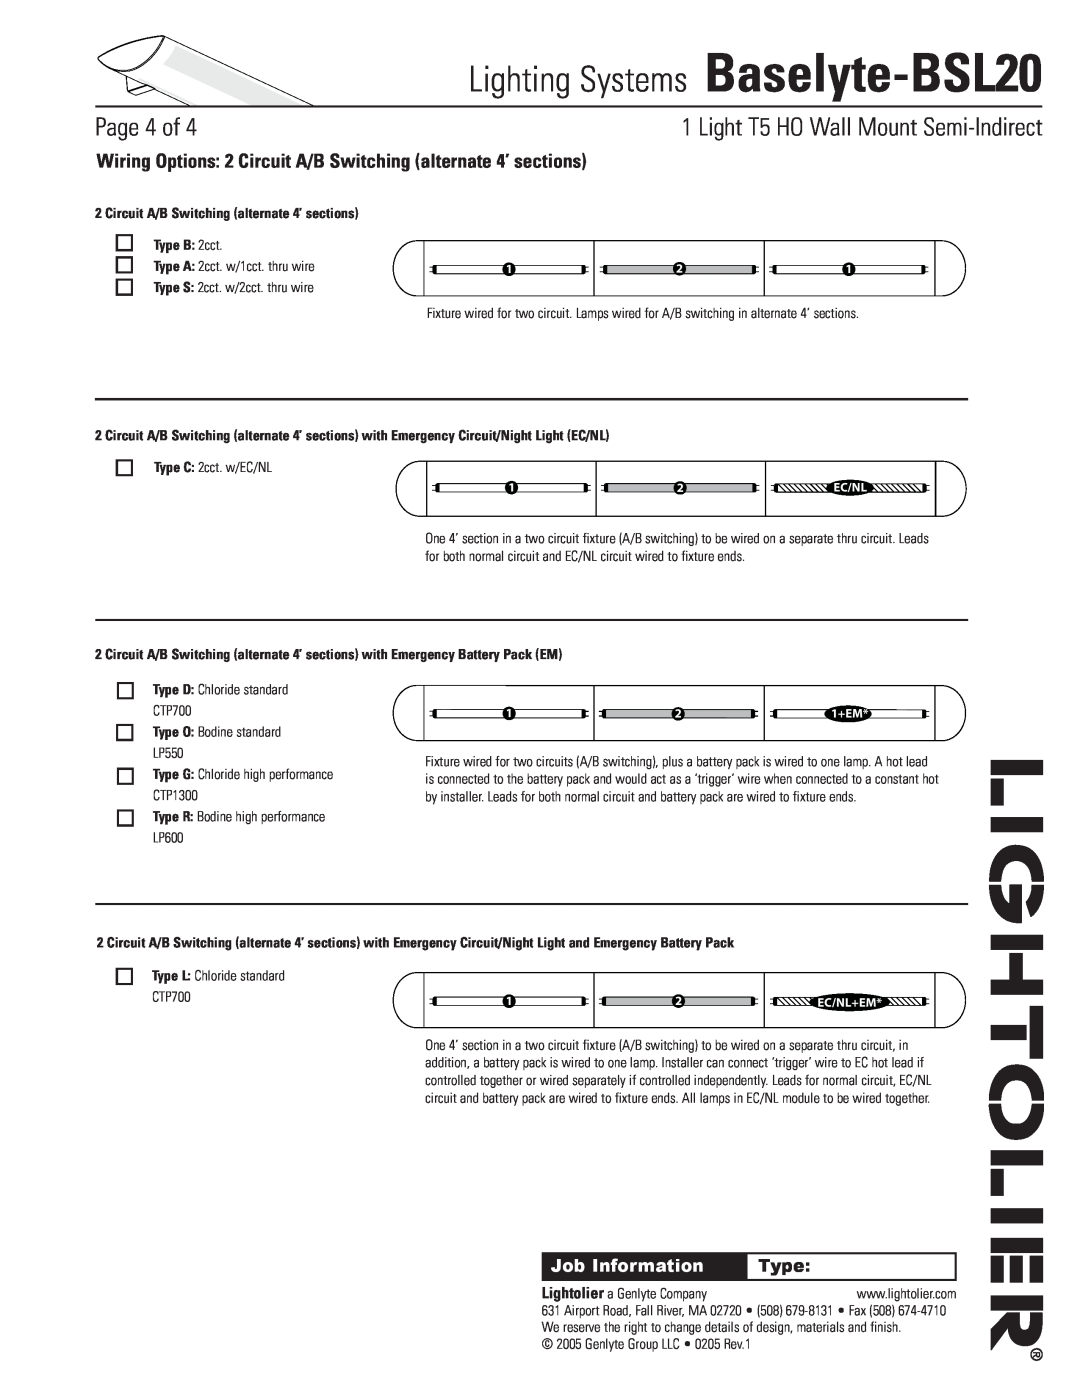 Lightolier Baselyte-BSL20 Circuit A/B Switching alternate 4’ sections, Type B 2cct, Type O Bodine standard LP550, Page of 